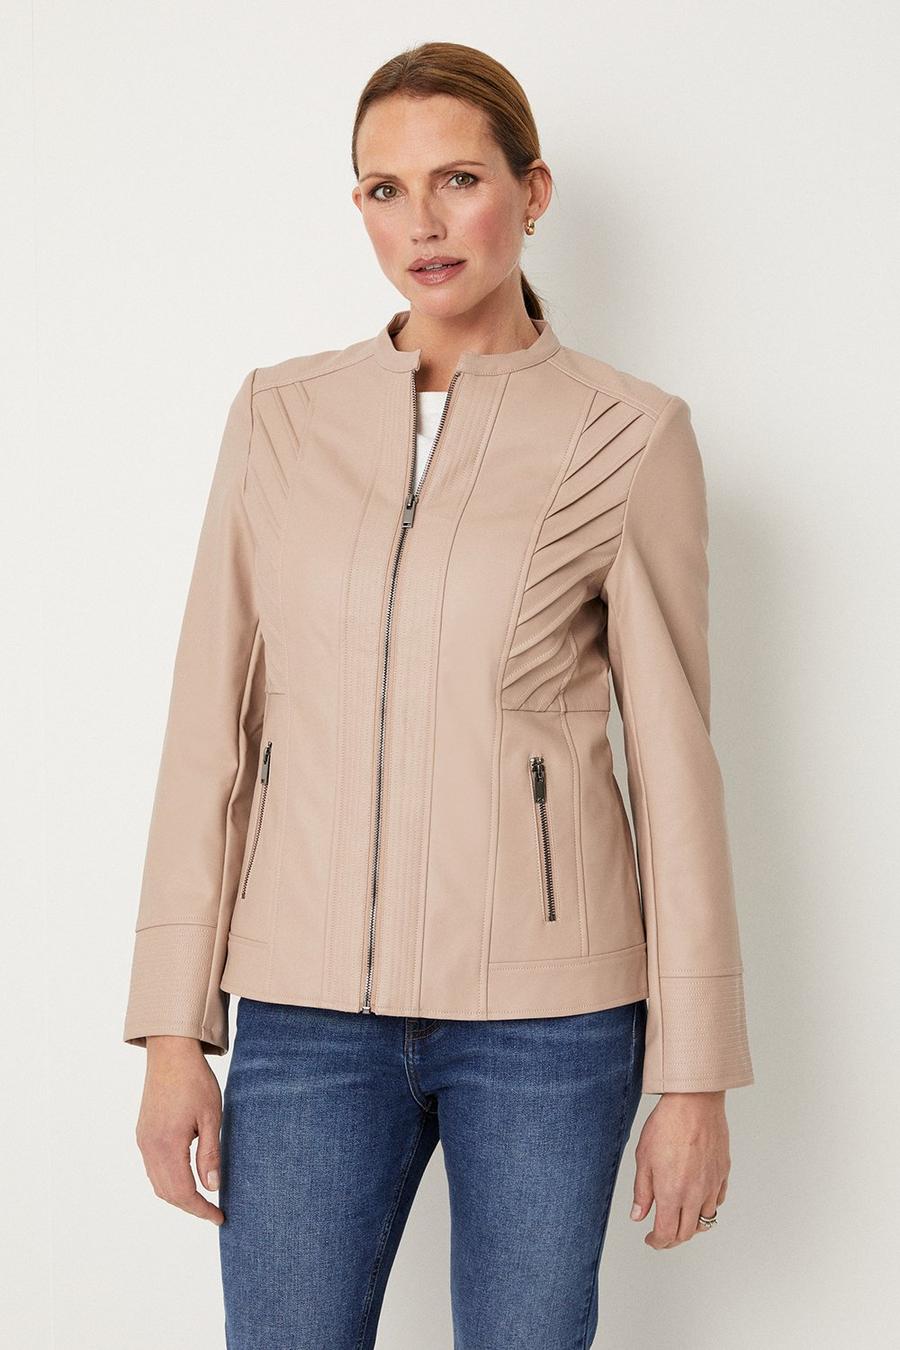 Mink Collarless Faux Leather Zip Front Jacket